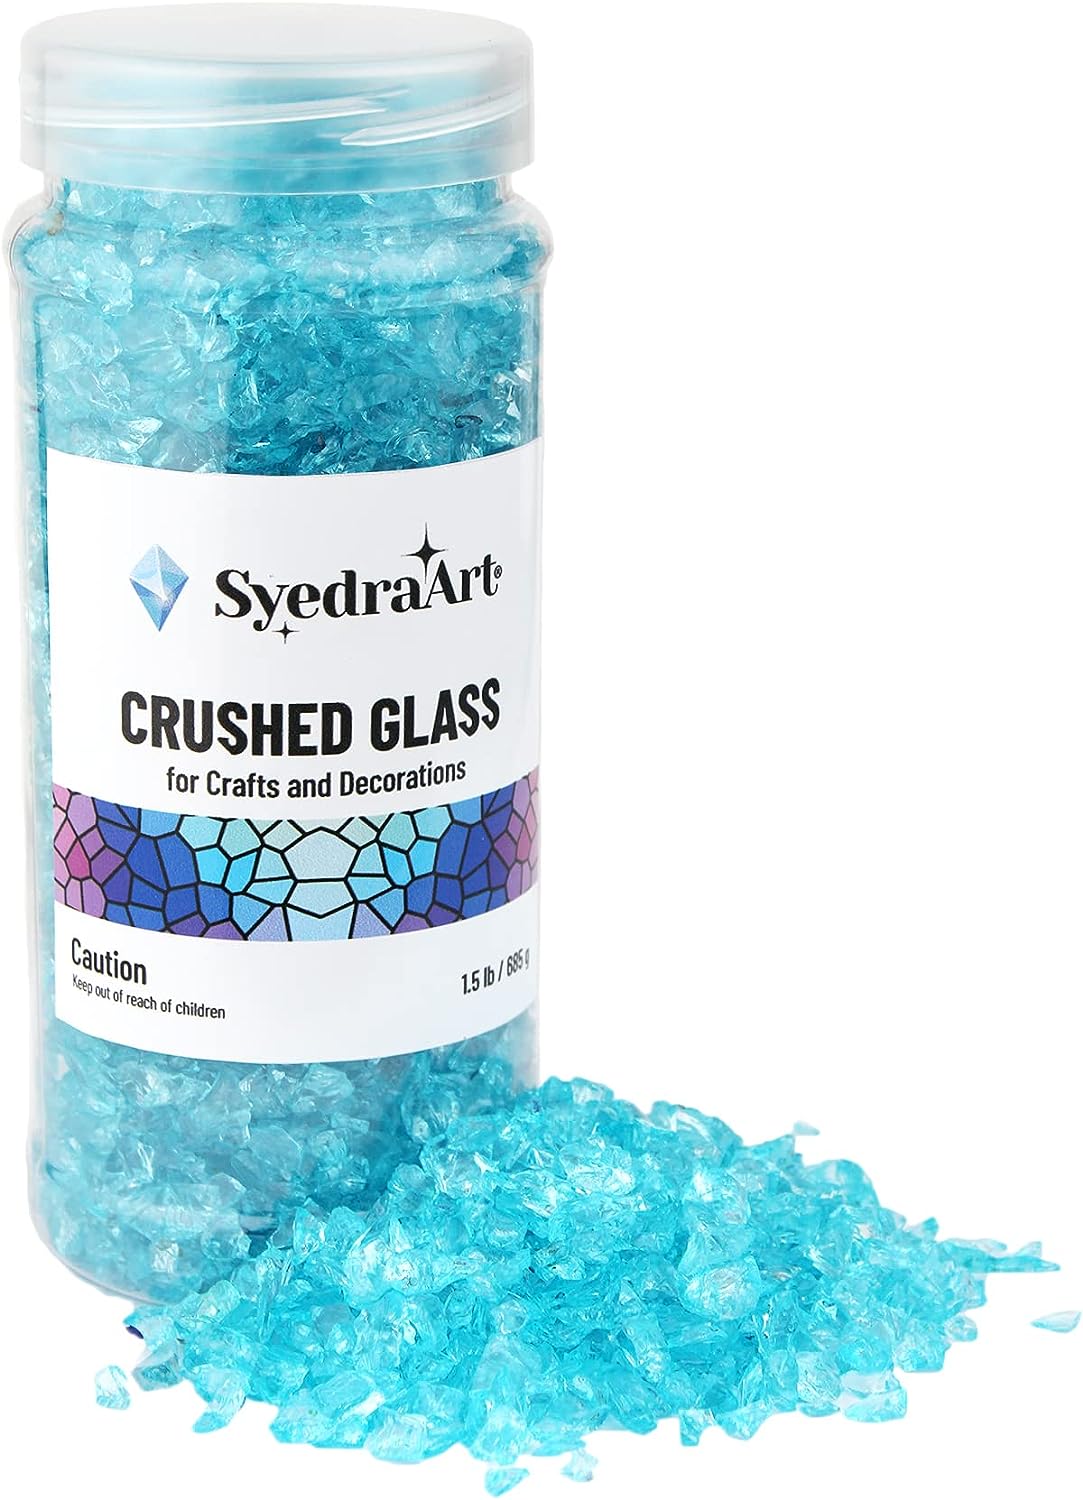 Syedra Art Syedra Crushed Glass for Crafts, Crushed High Luster Chips, Broken Glass Pieces, Glitter, 3-6mm, 410g (Silver)